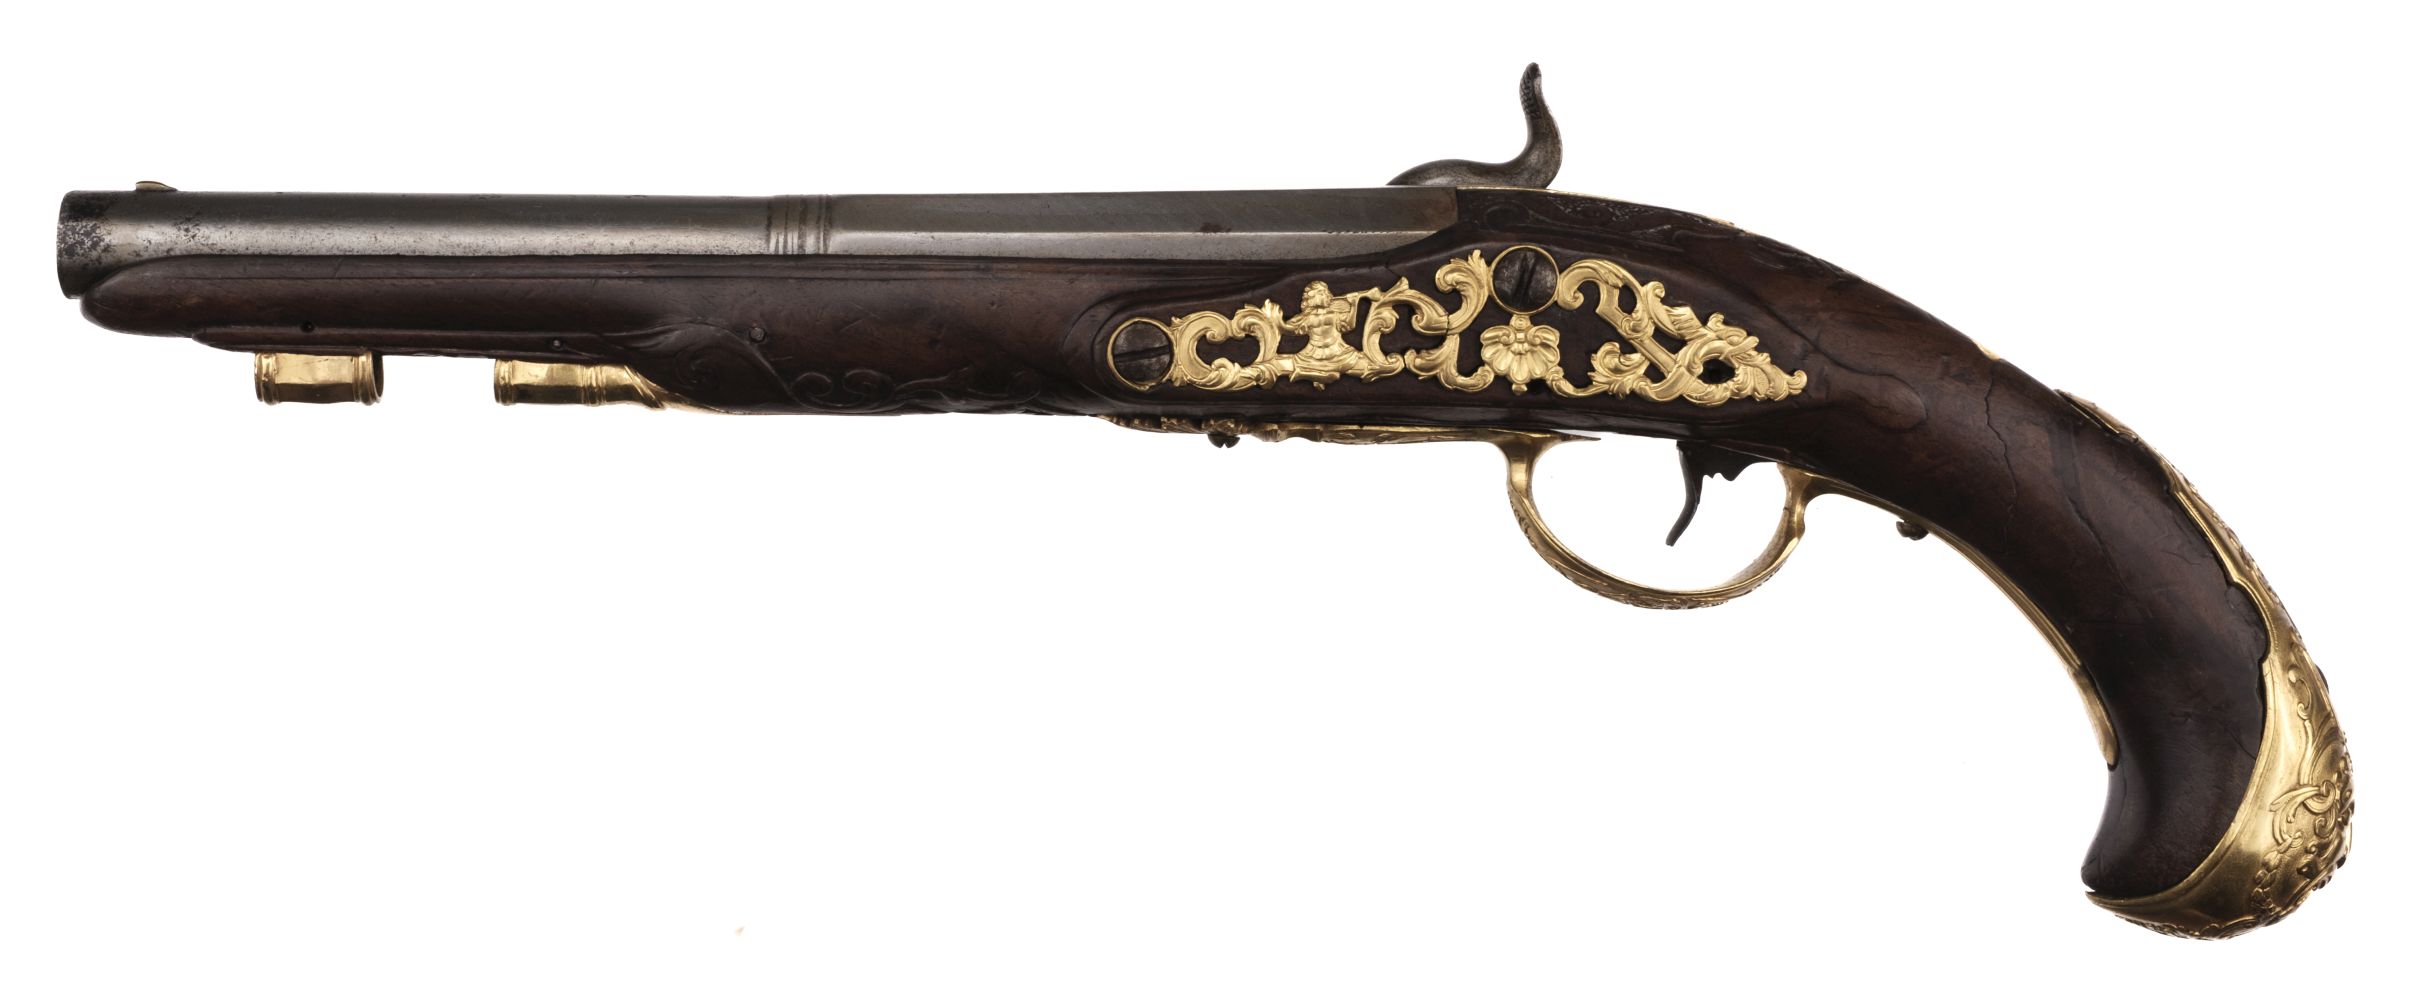 Pistol. A Continental percussion pistol converted from flintlock, circa late 18th century